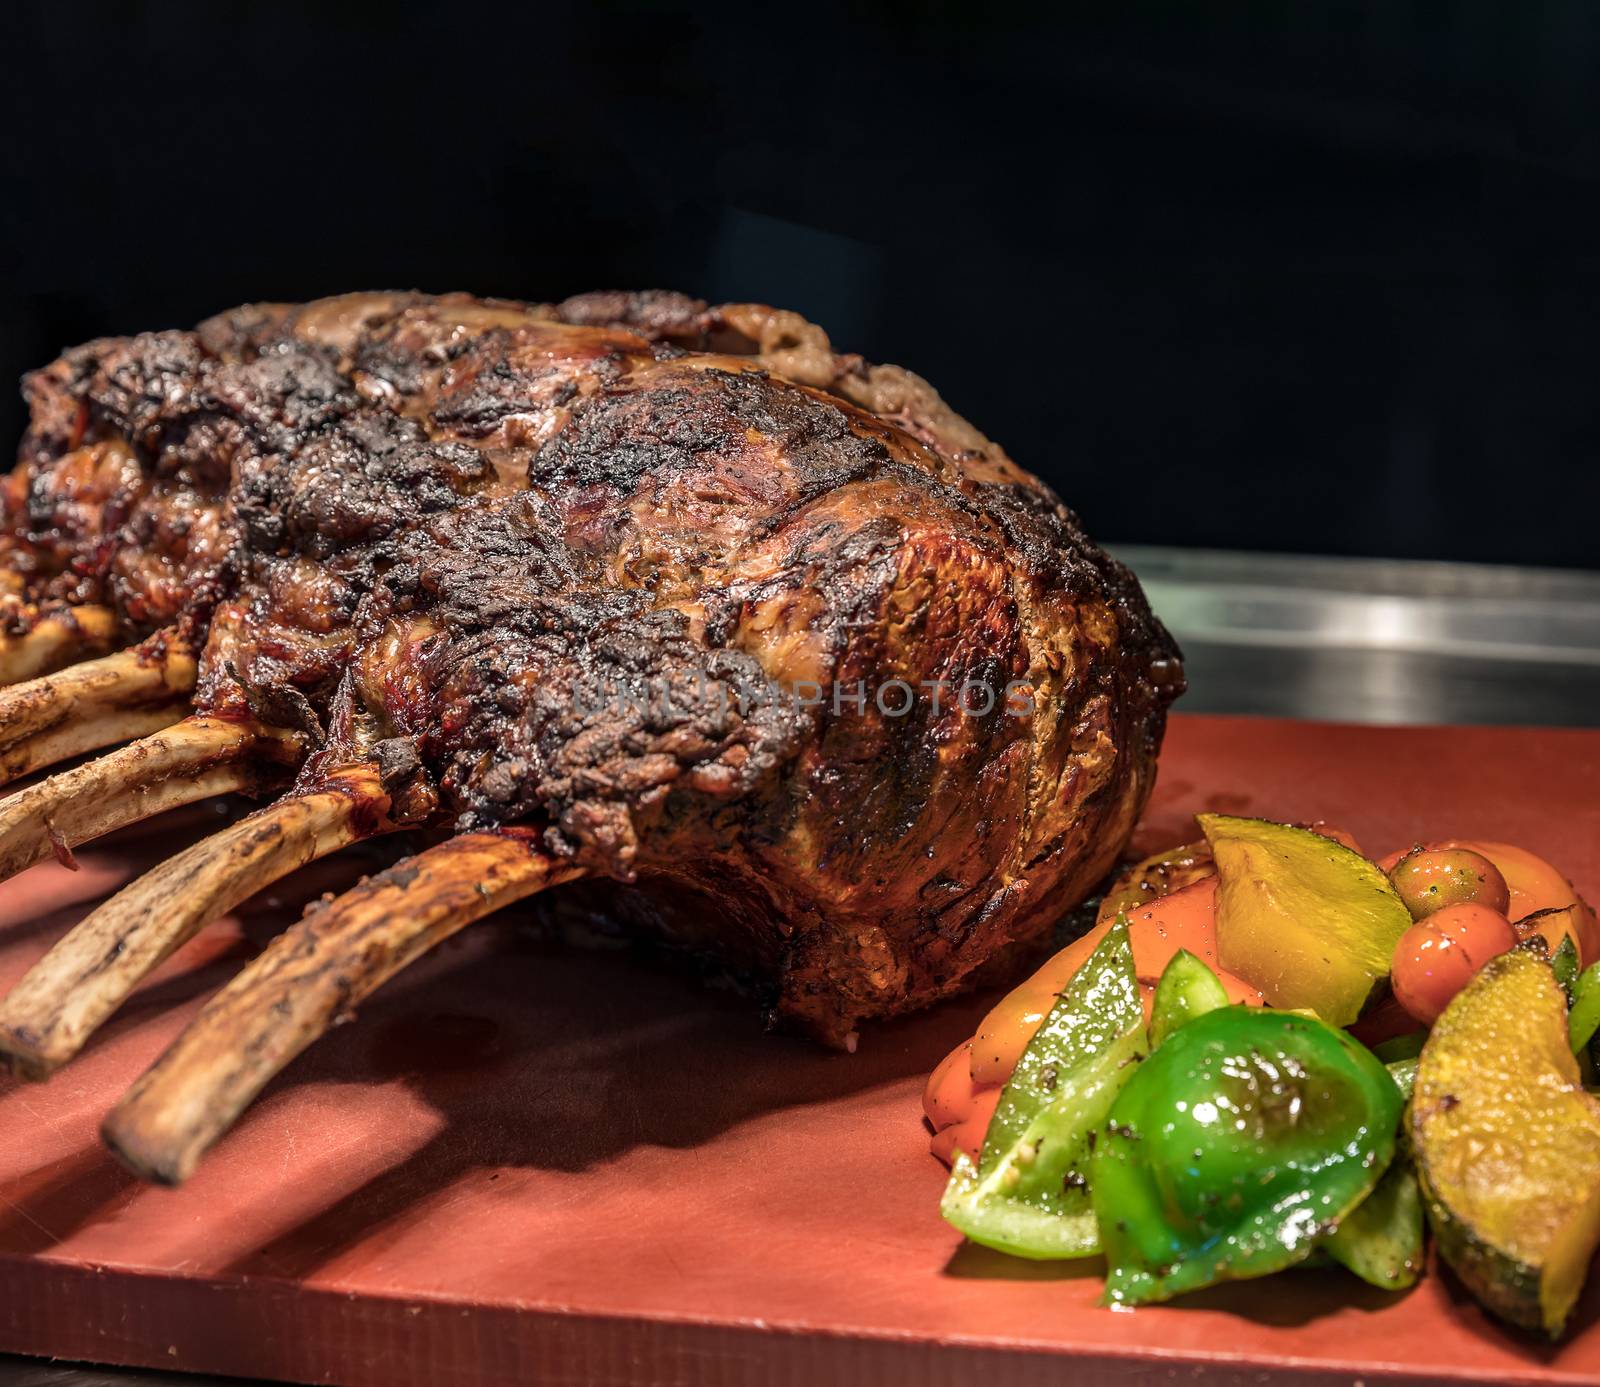 Carving of Wagyu beef roast Prime rib